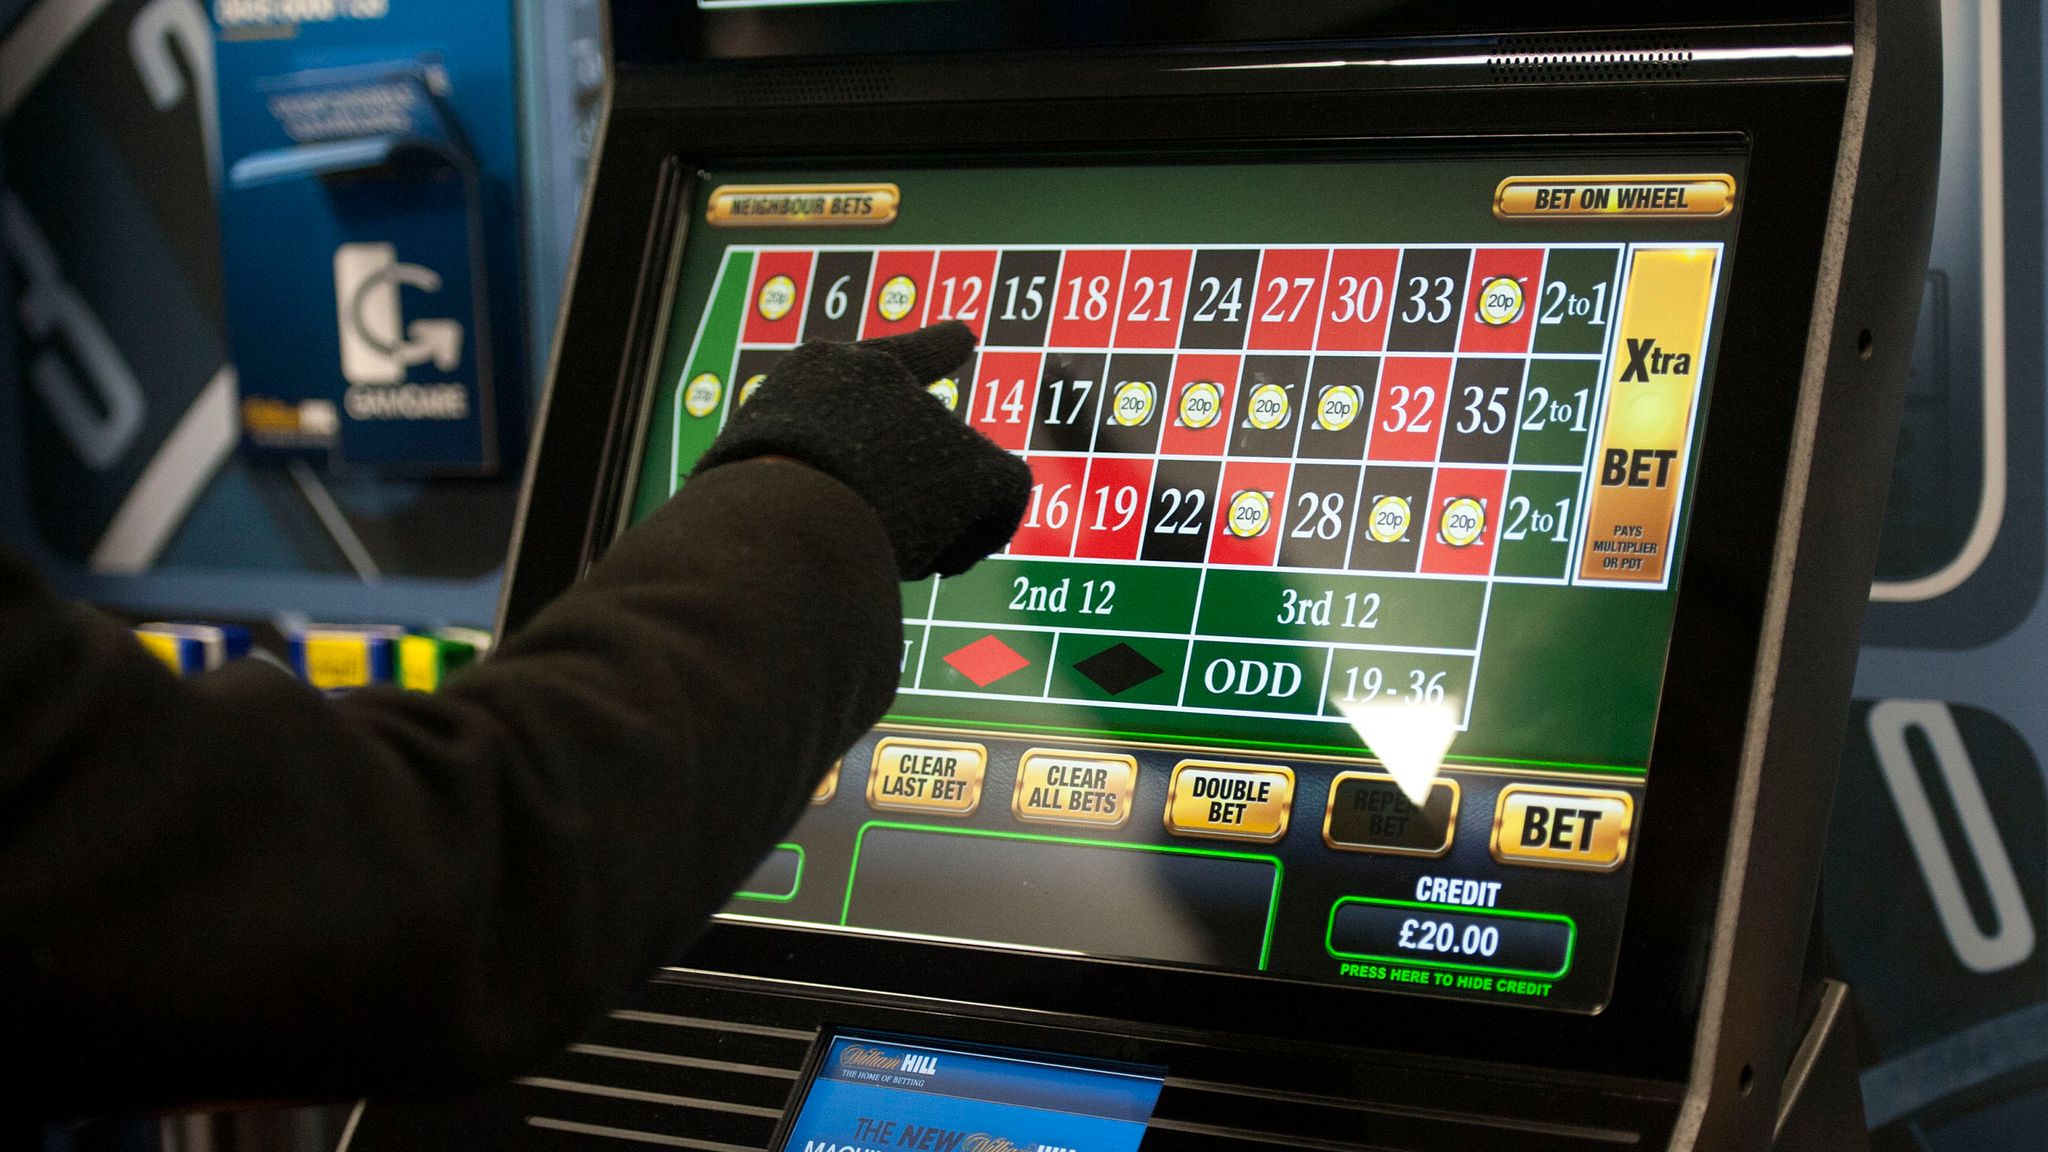 Fixed odds betting terminals rigged games betting shop fraudsters jailed diagonal branch